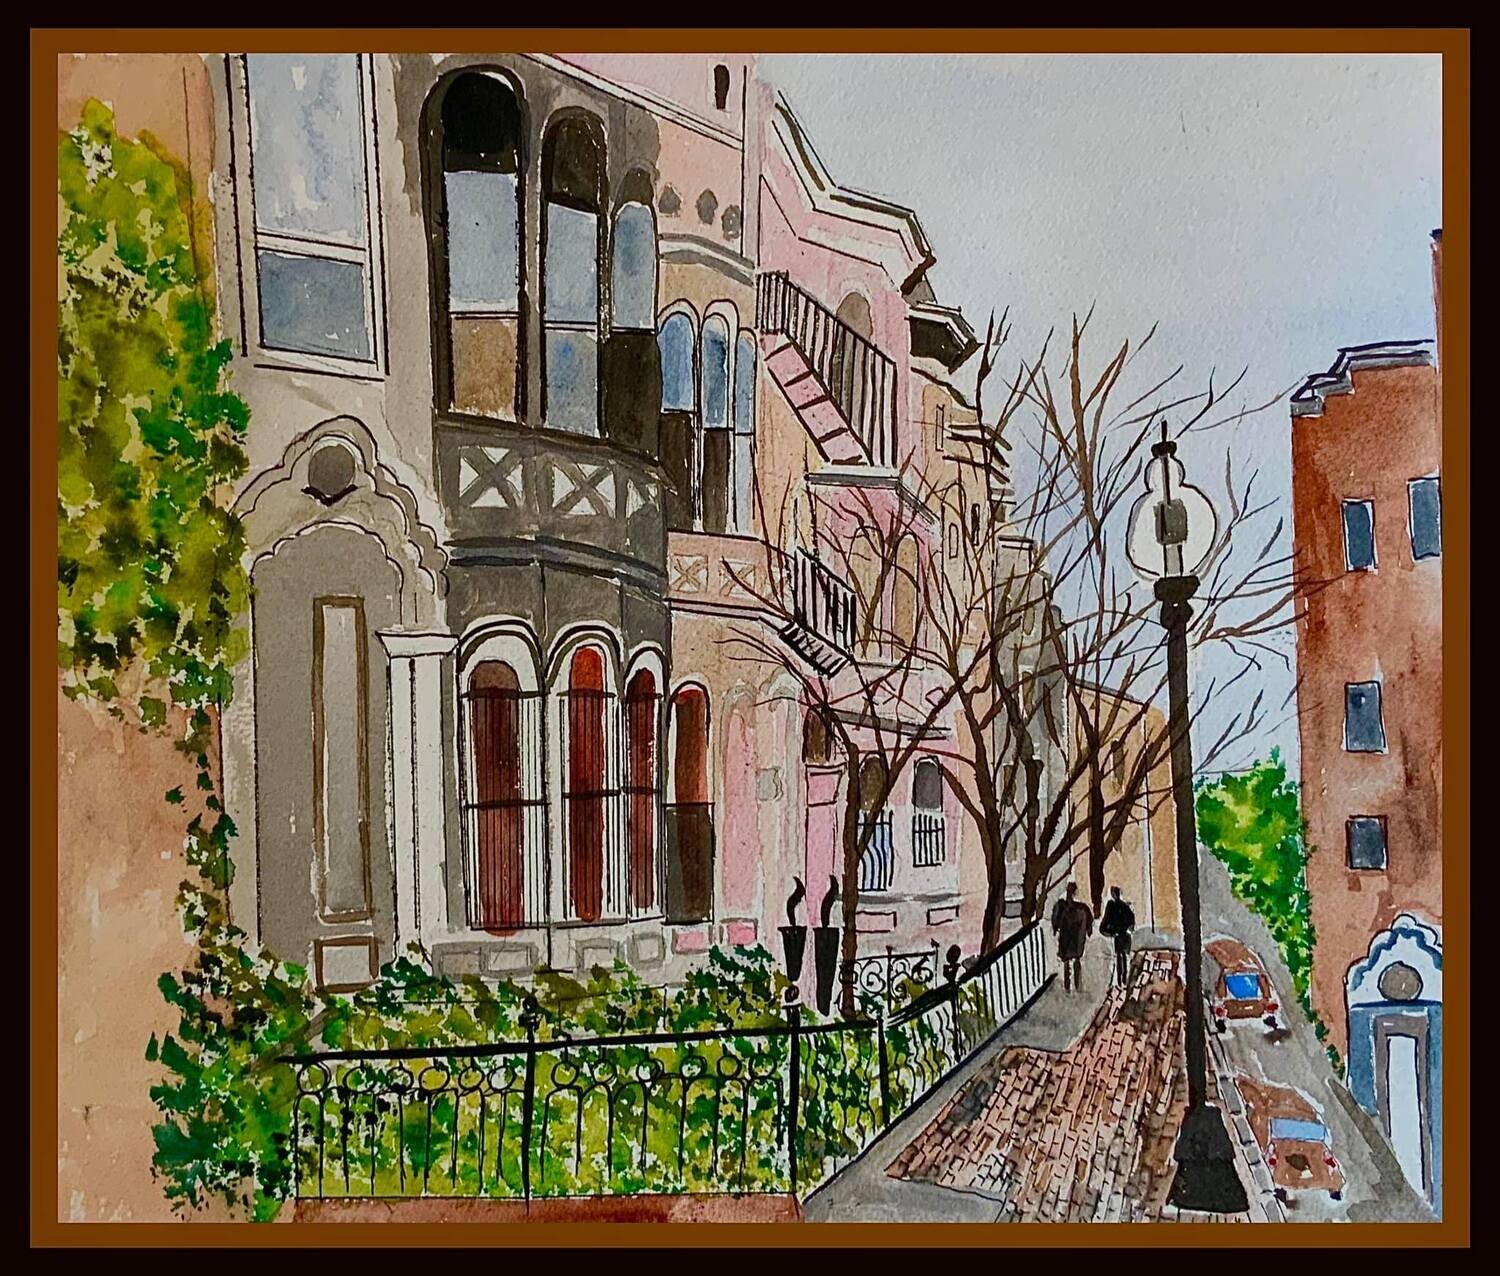 The Back bay streets of Boston, Watercolor painting